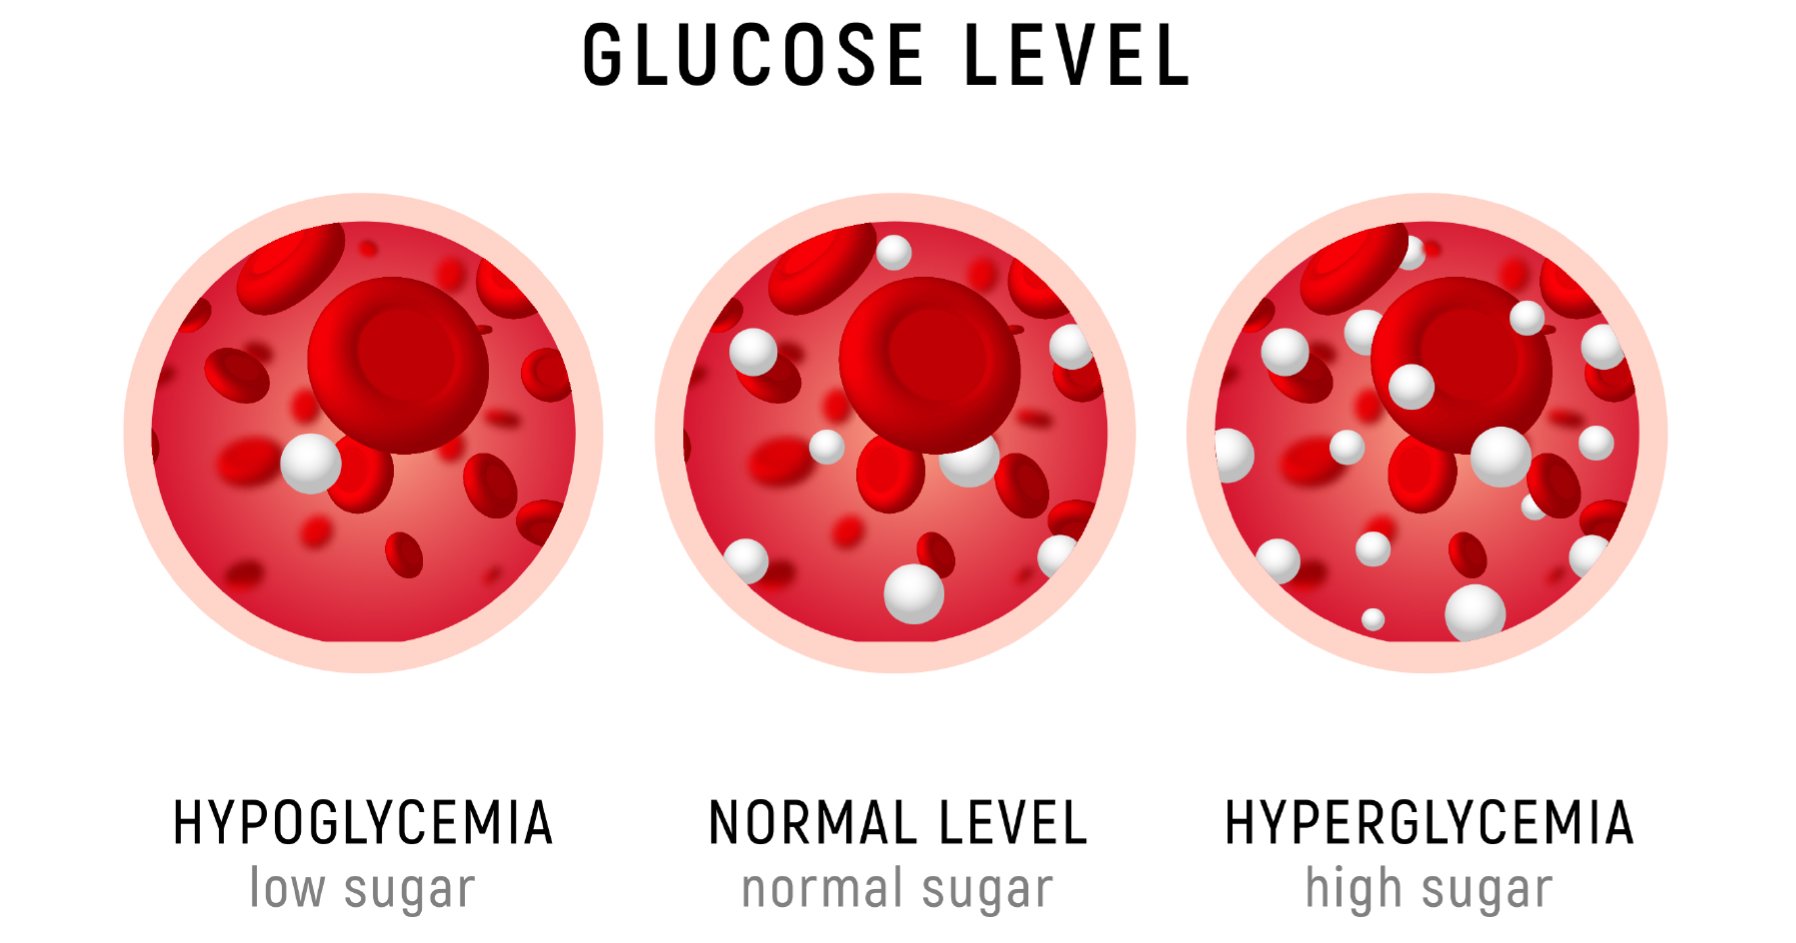 Image displaying glucose levels in the blood.